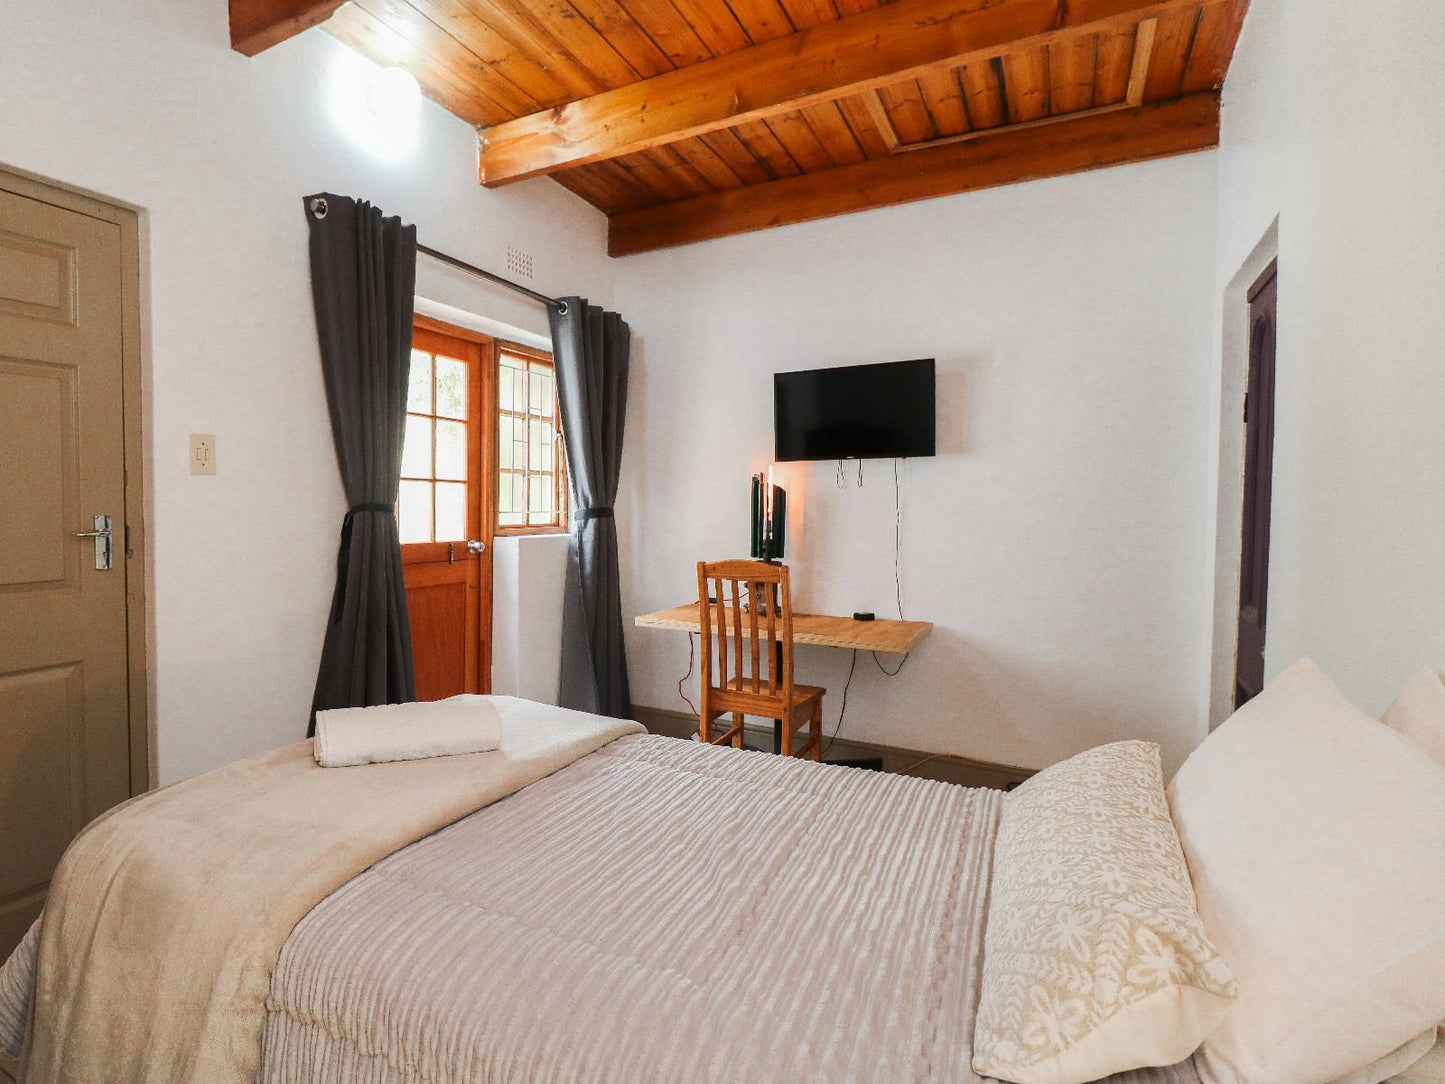 Swallows Nest Laingsburg Western Cape South Africa Bedroom